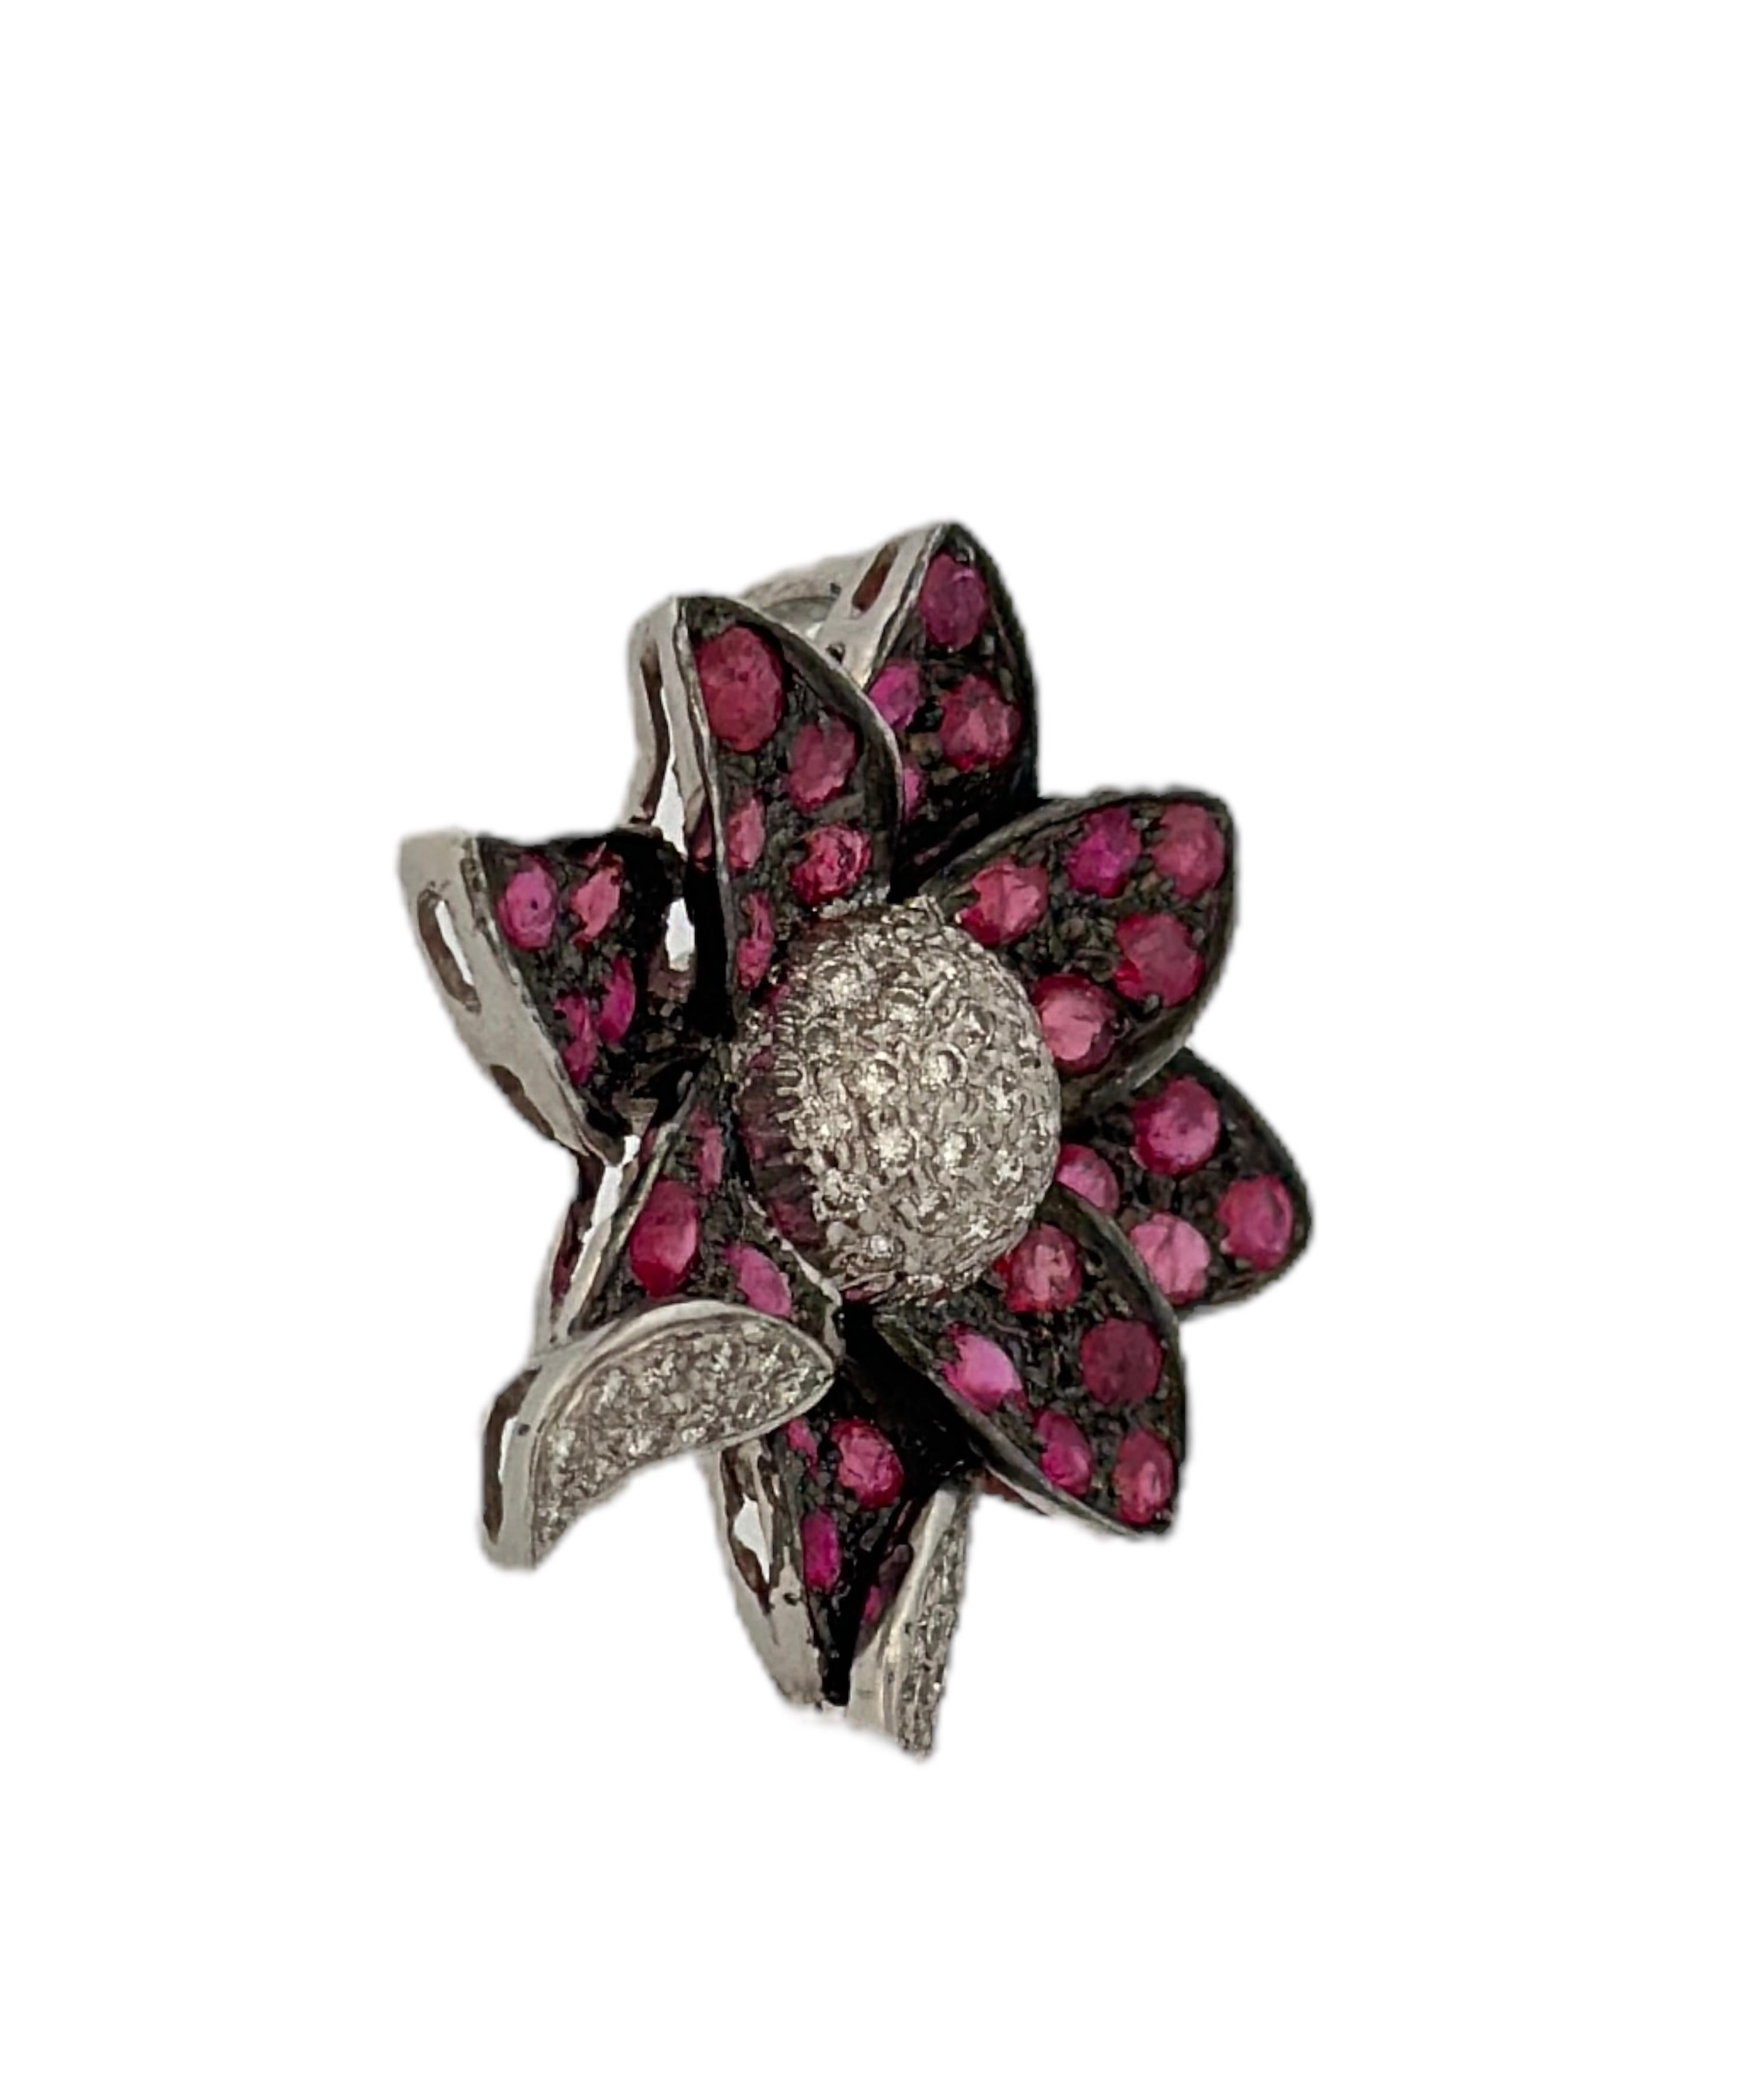 Exemplifying the timeless beauty of the early 20th century, this Flower-Shaped Pendant, adorned with White Diamonds and a Red Ruby, is truly a work of art. Weighing a total of 7.1 grams, it boasts an intricate and delicate design. The flower's